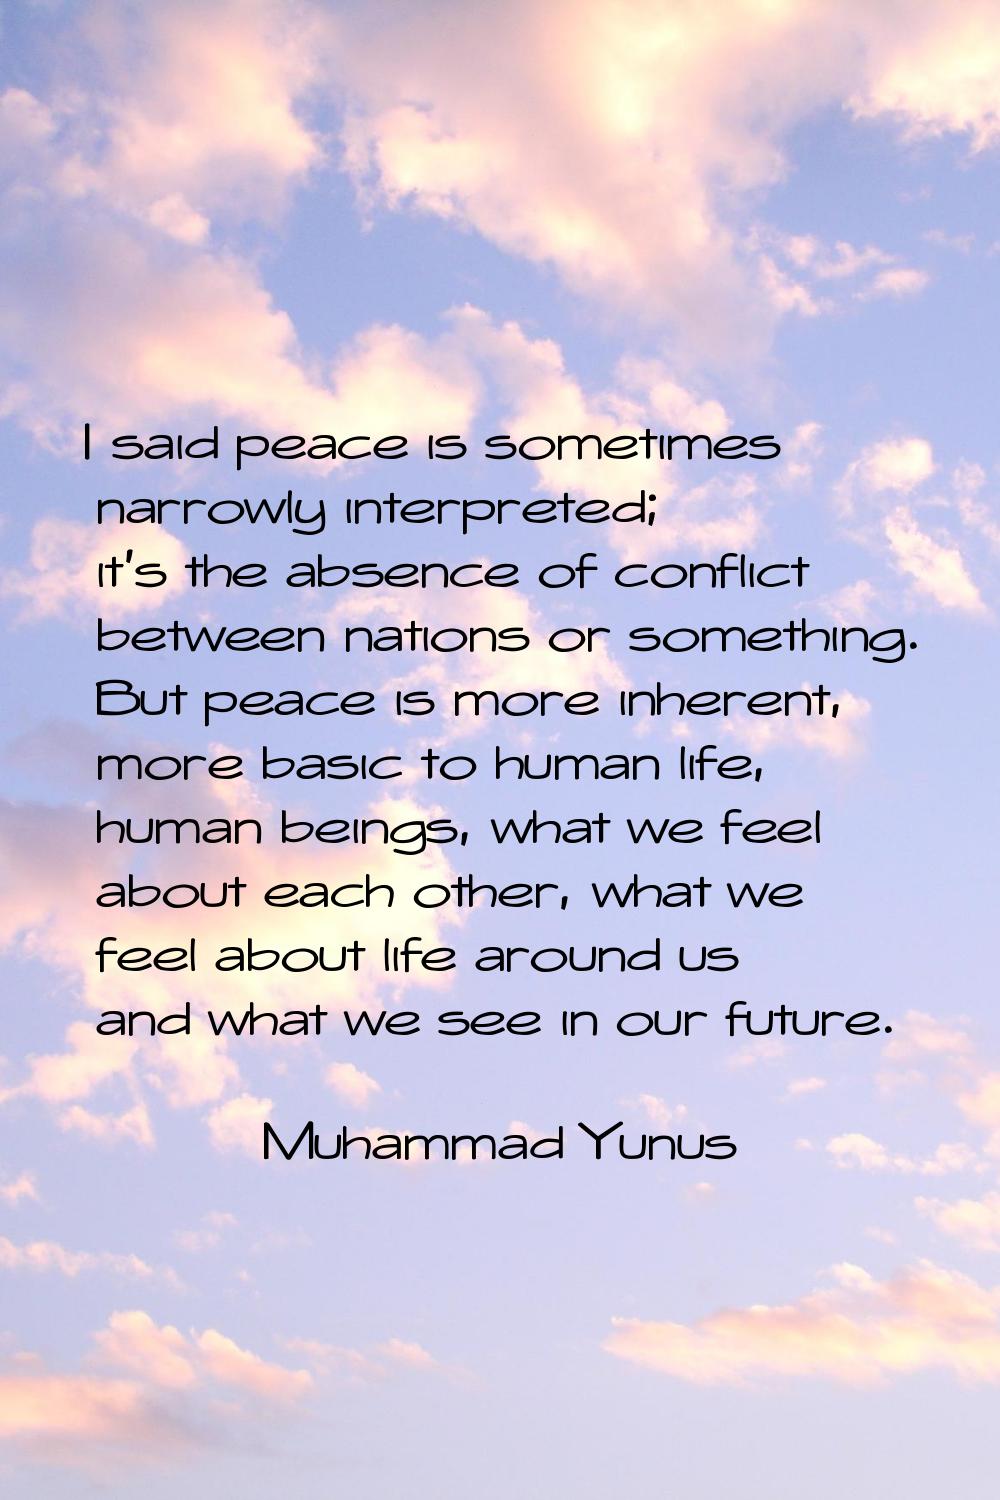 I said peace is sometimes narrowly interpreted; it's the absence of conflict between nations or som